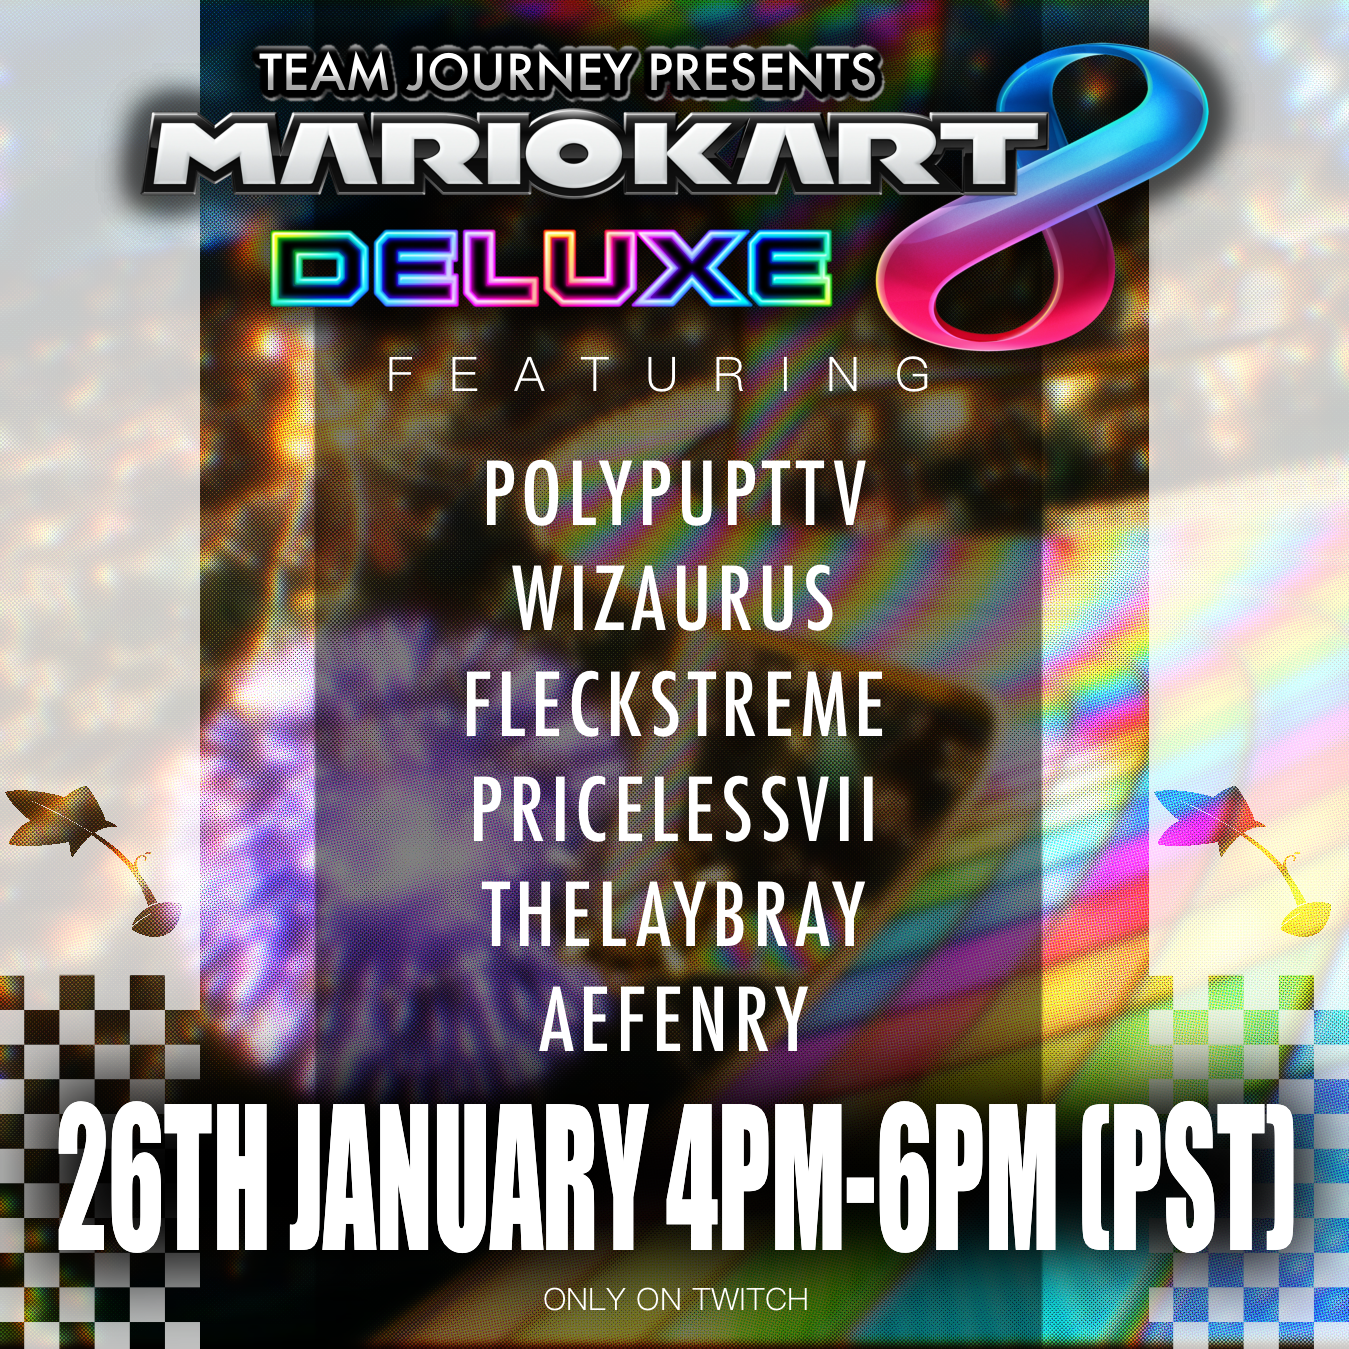 Join Team Journey on January 26th for Mario Kart